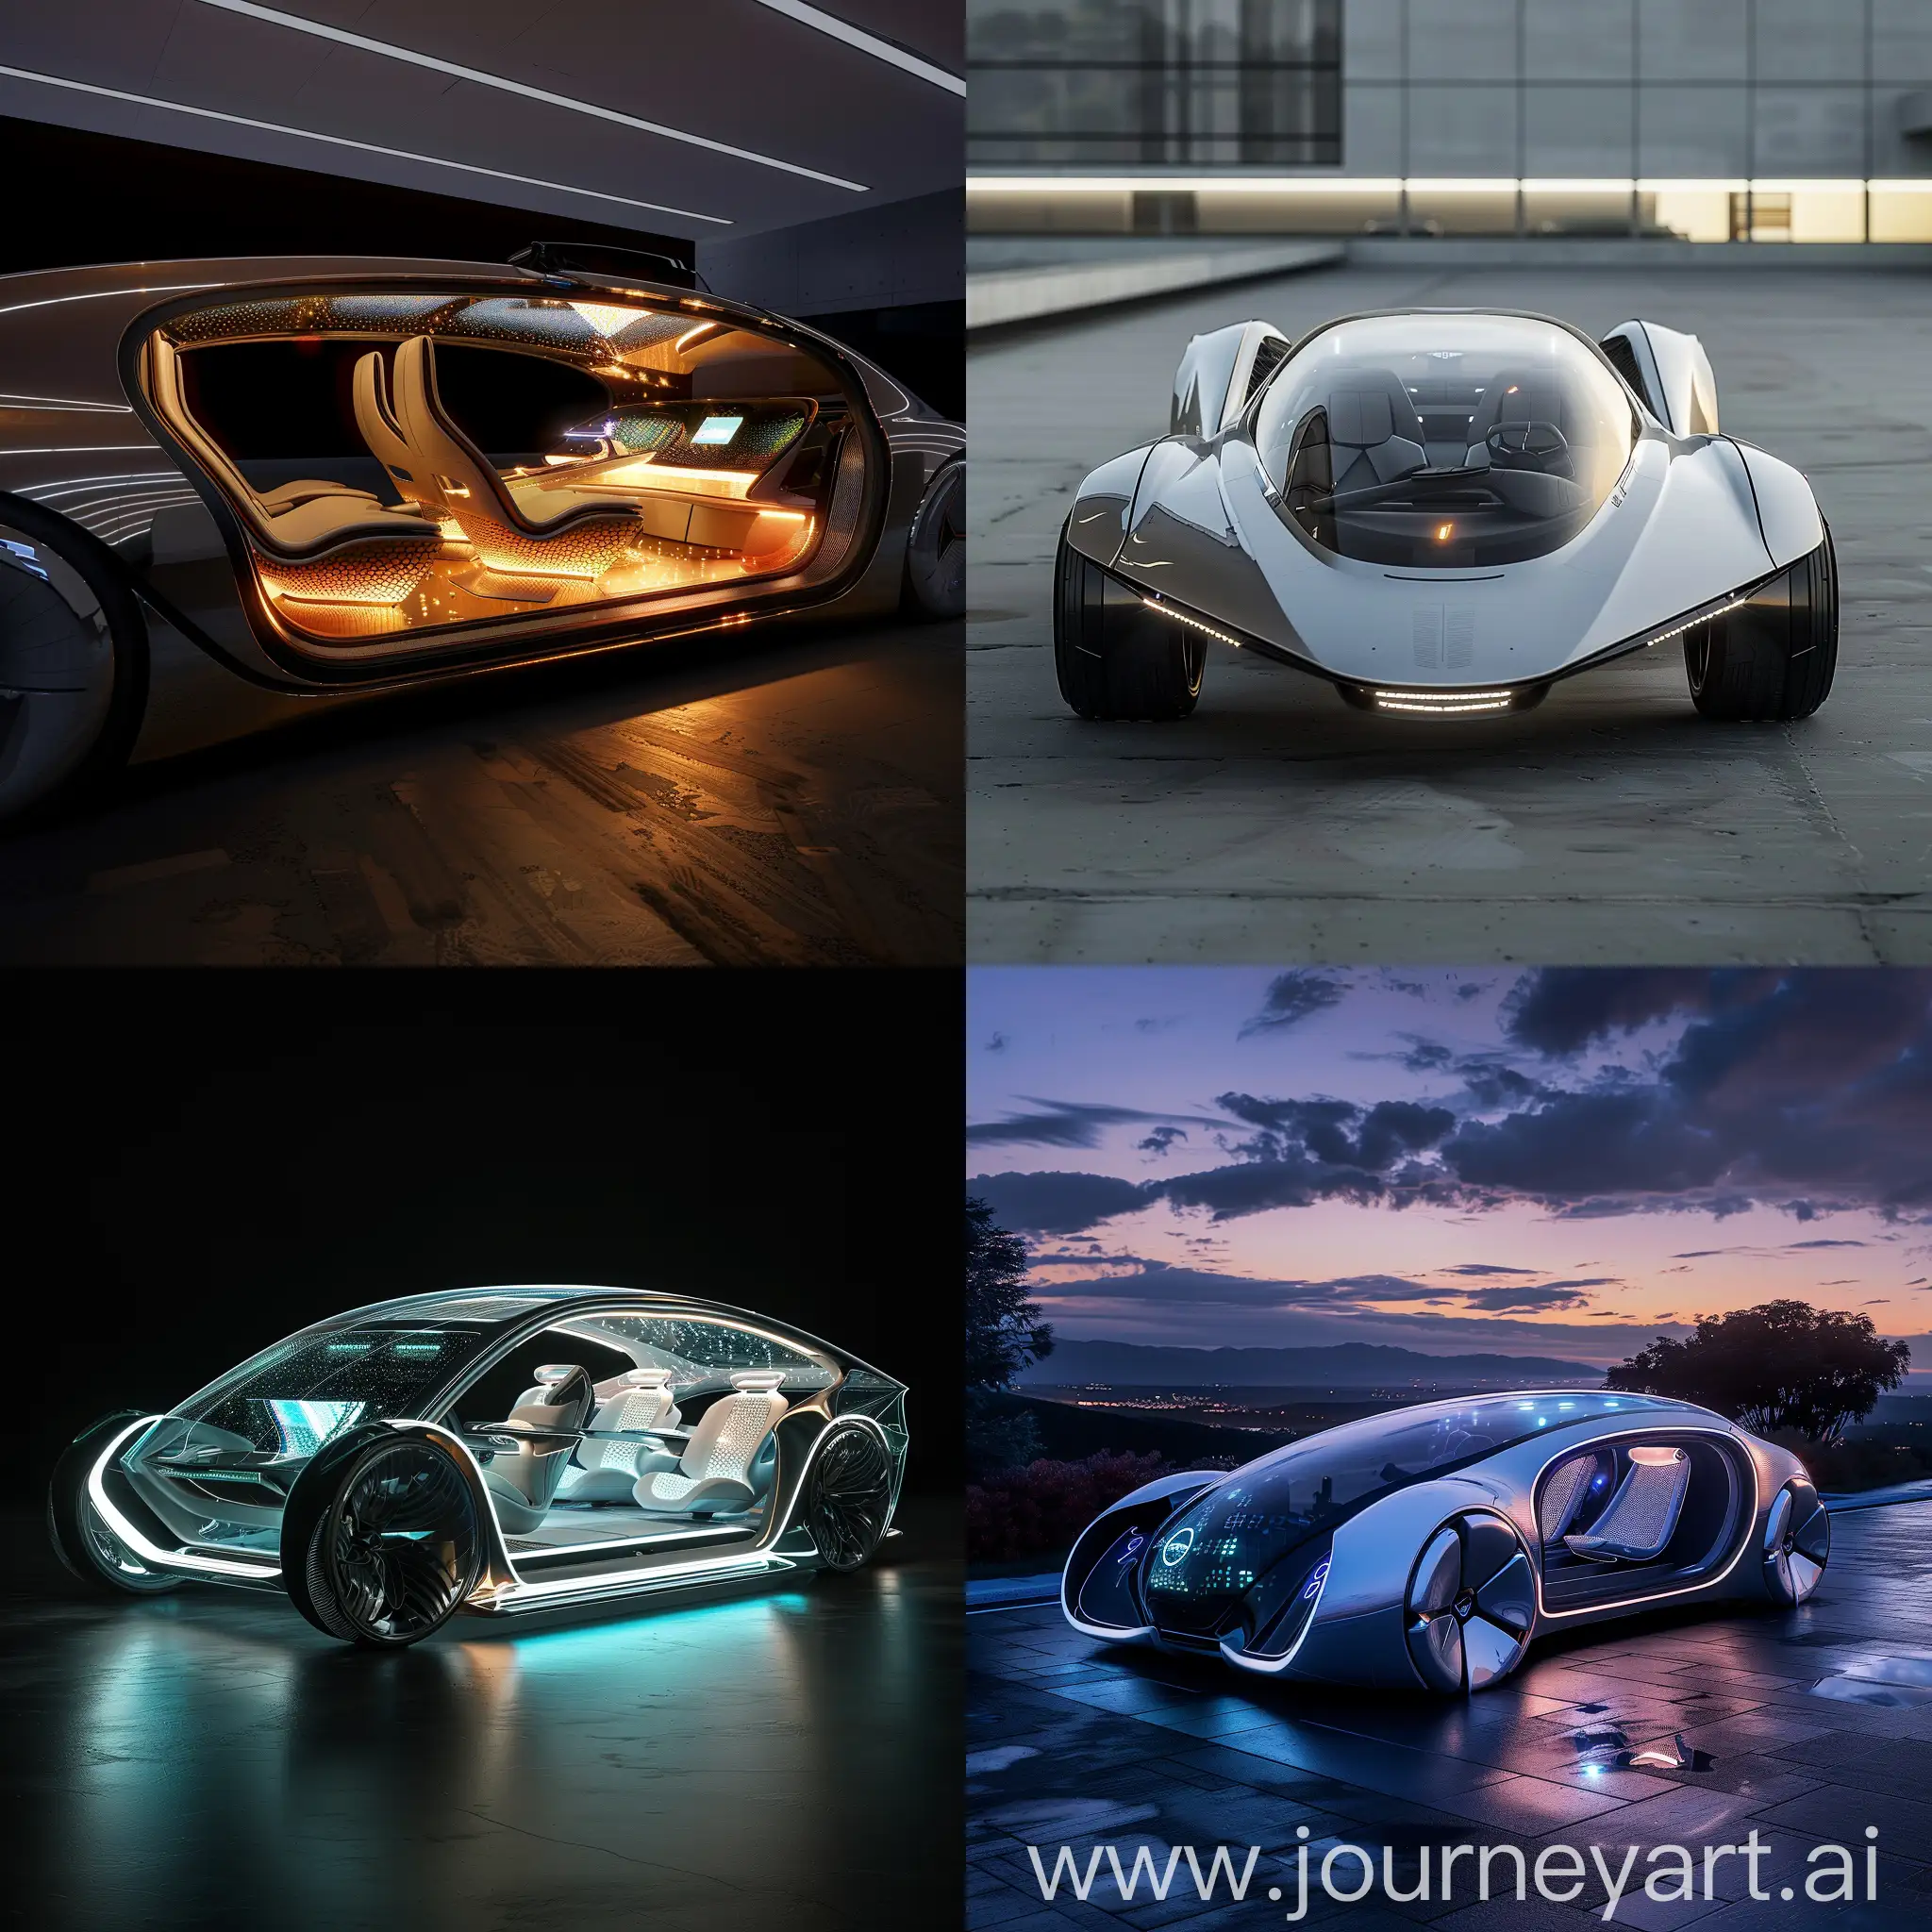 Futuristic-Car-with-Holographic-Displays-and-Sustainable-Materials